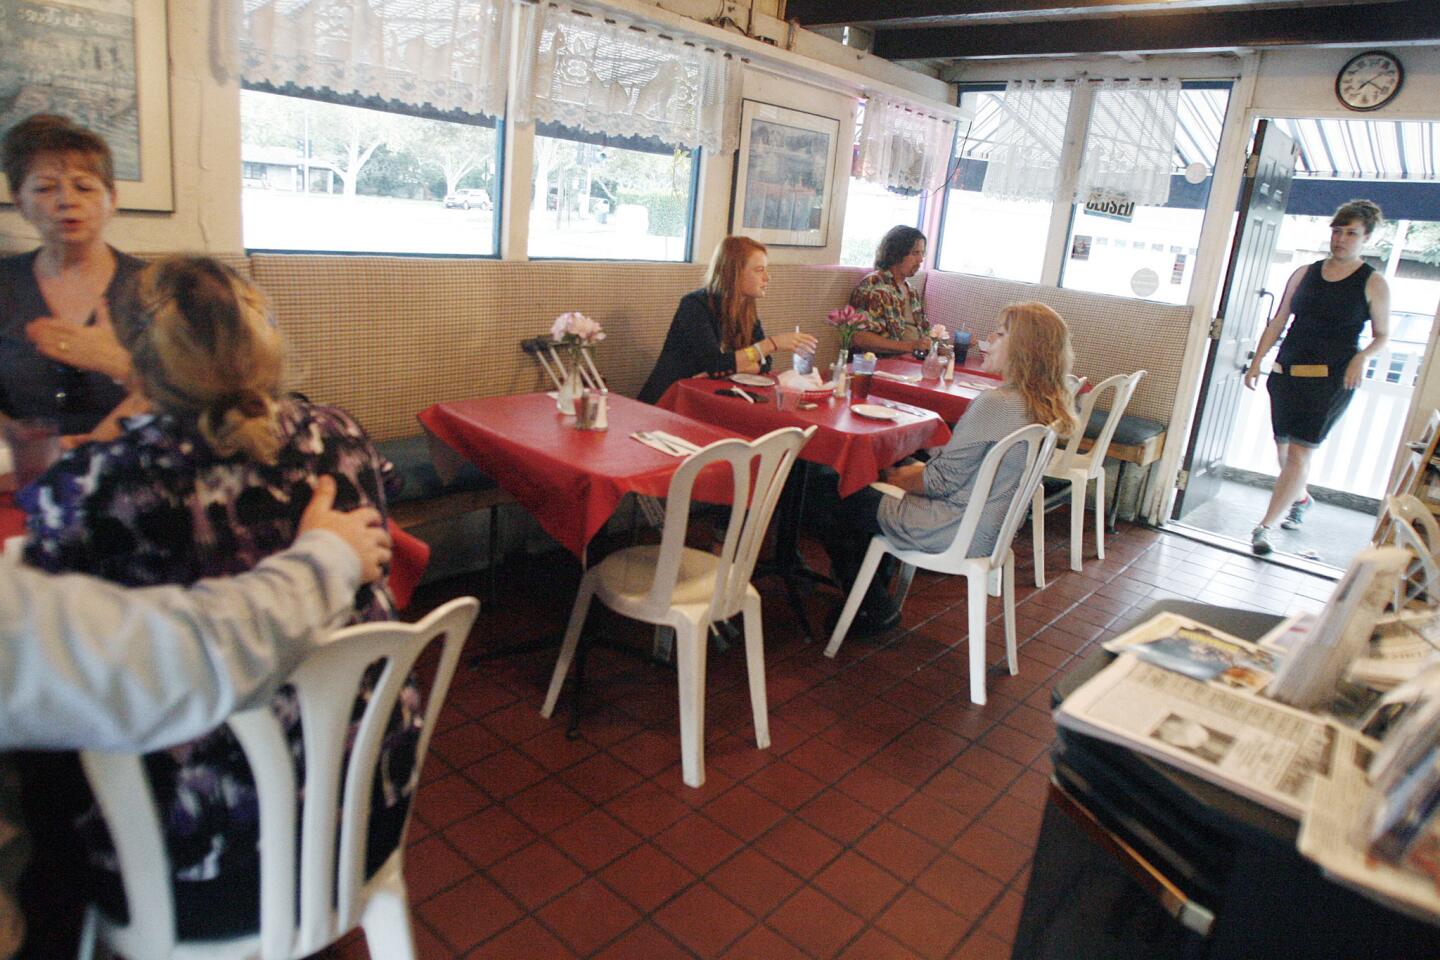 Customers dine at Riverside Cafe in Burbank on Wednesday, August 22, 2012.